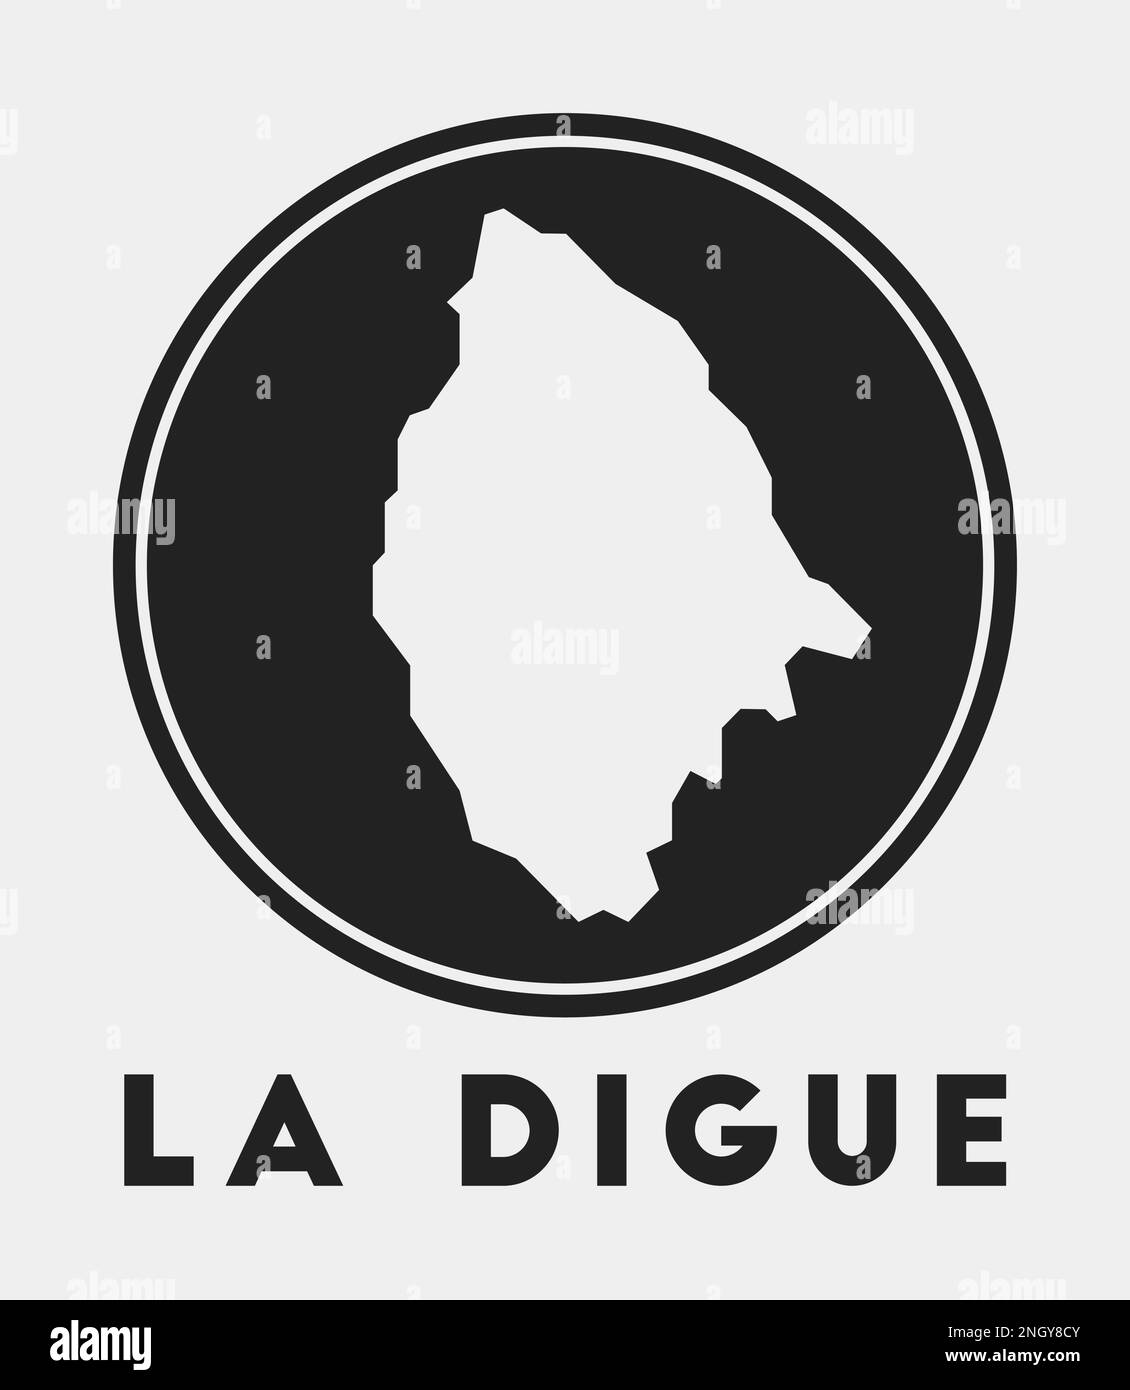 La Digue icon. Round logo with island map and title. Stylish La Digue ...